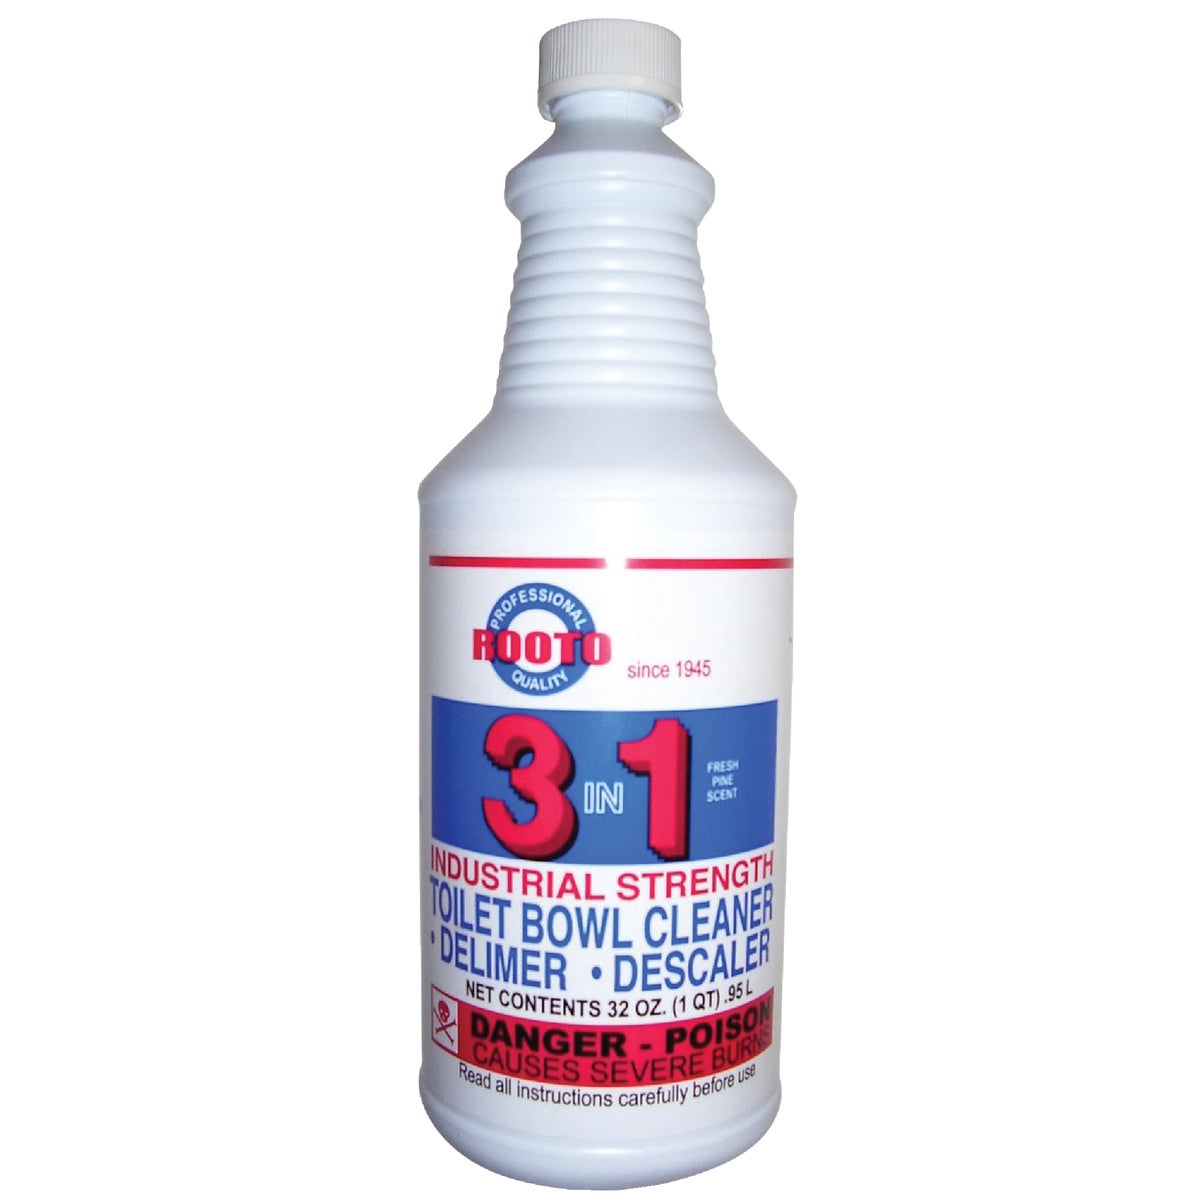 Item 477788, Industrial strength liquid toilet bowl cleaner is designed to clean and 